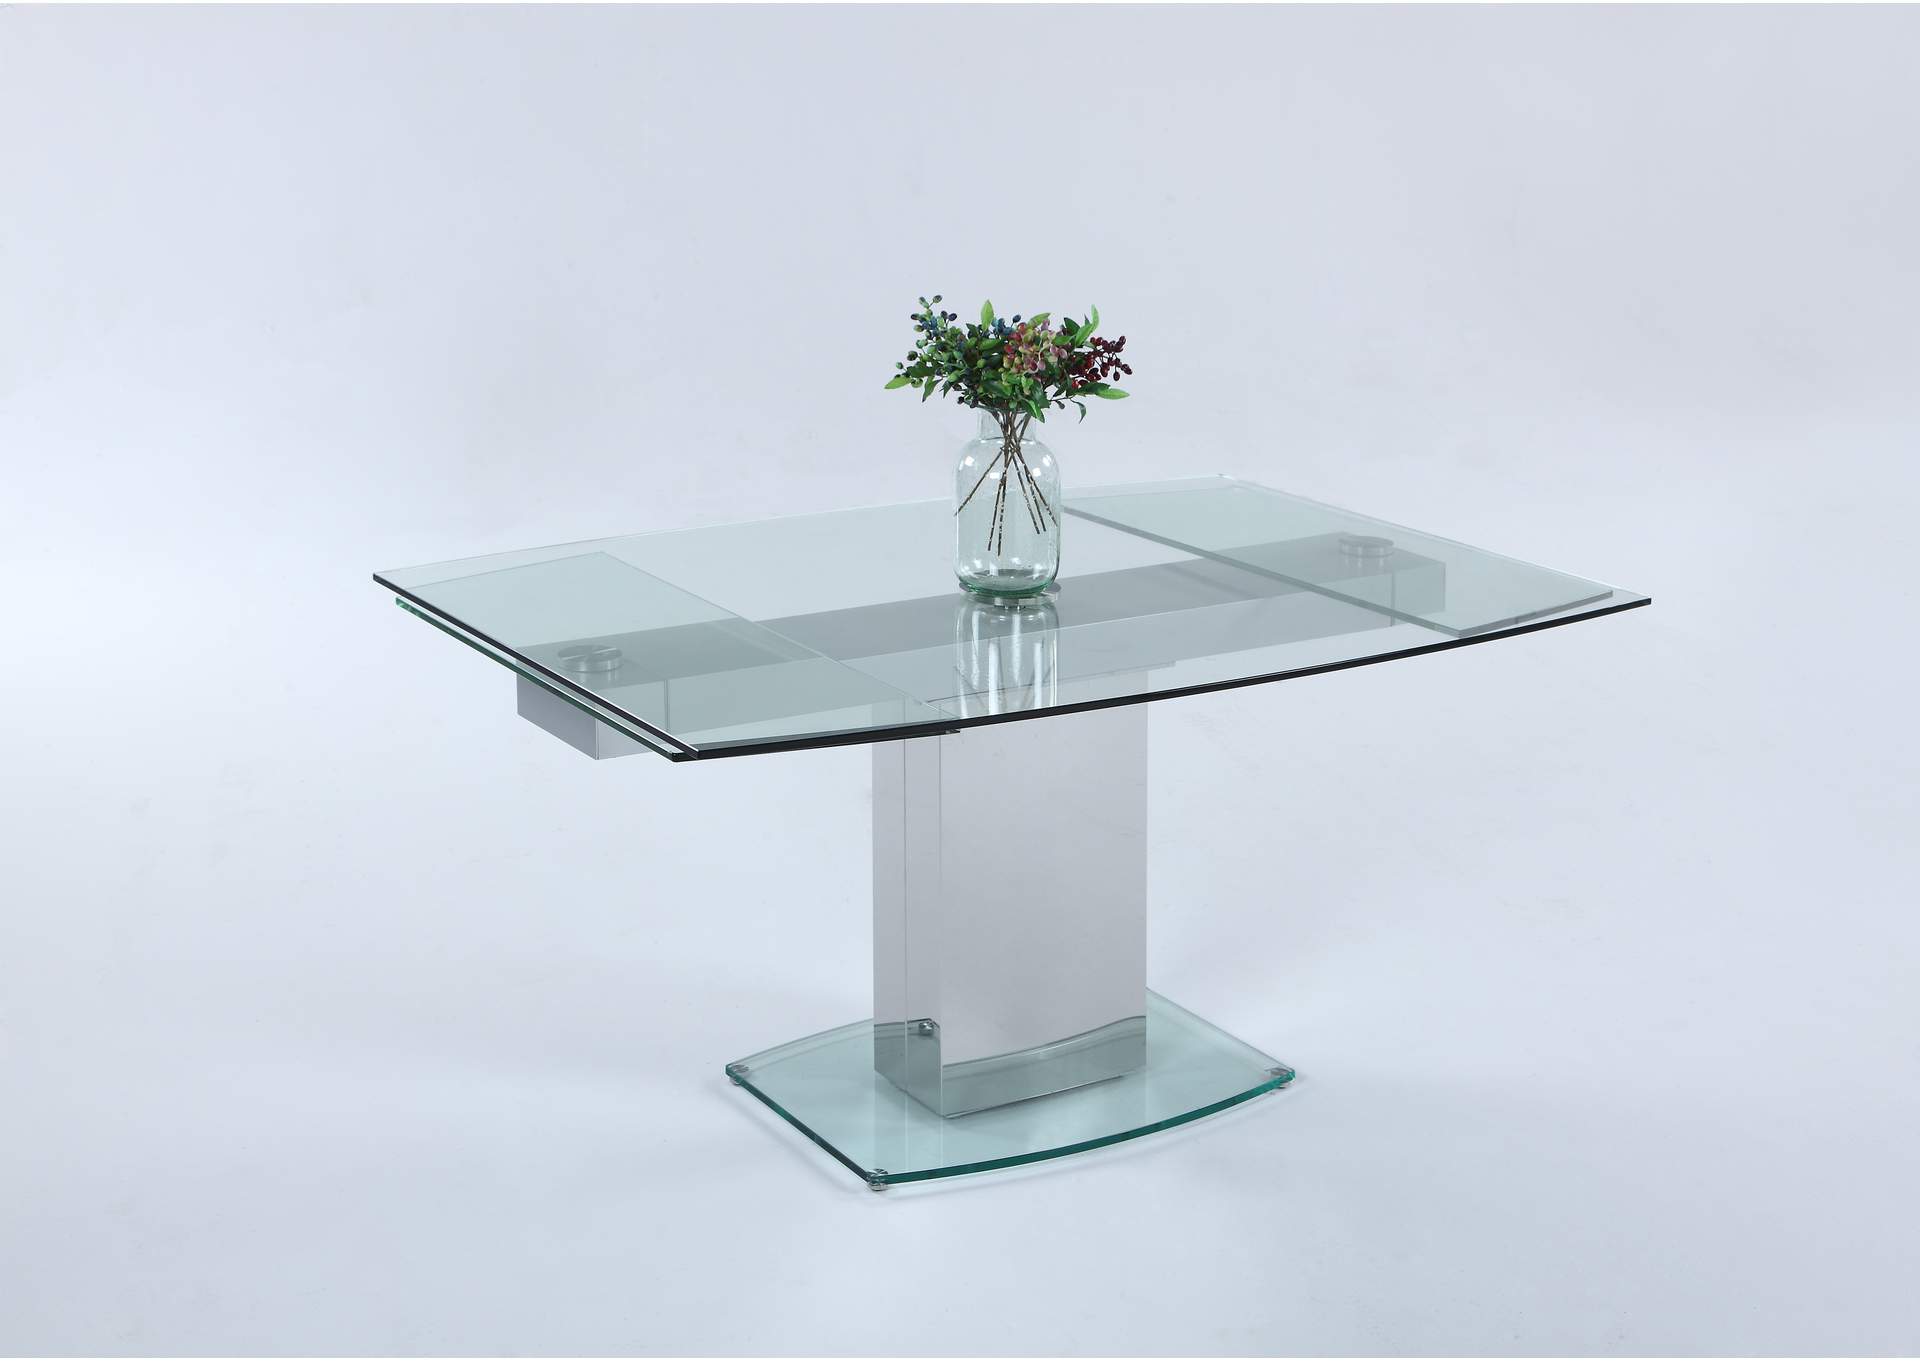 Mackenzie Clear Glass Top Dining Table,Chintaly Imports